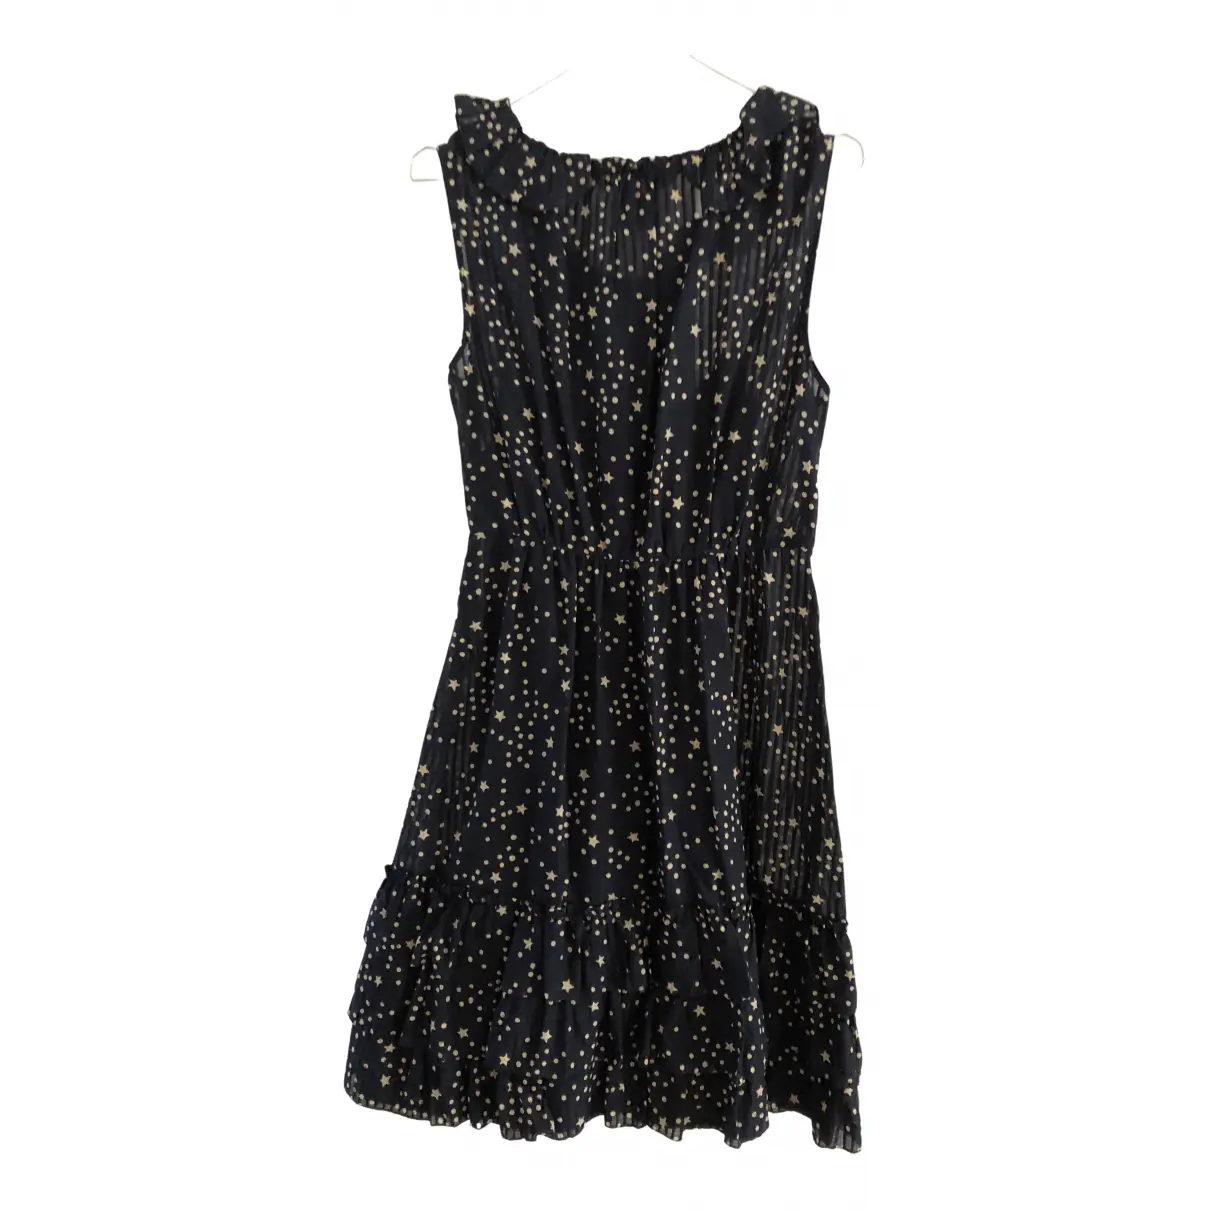 Buy Marc by Marc Jacobs Silk dress online